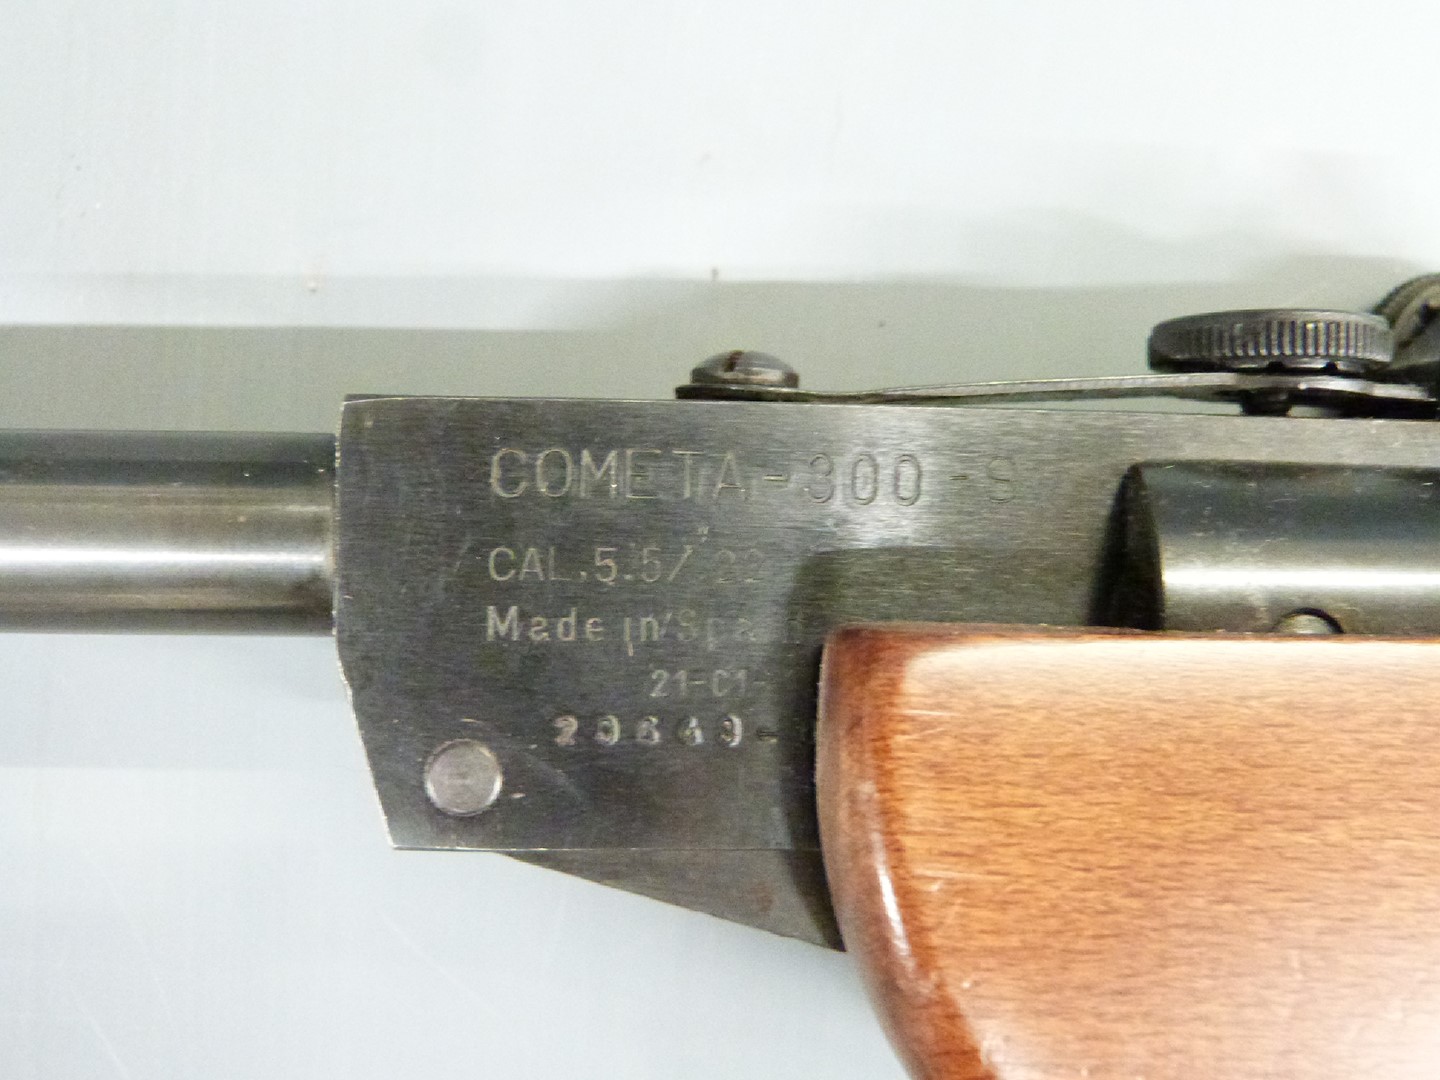 Cometa 300-S .22 air rifle with raised cheek piece and adjustable sights, serial number 20643. - Image 3 of 3